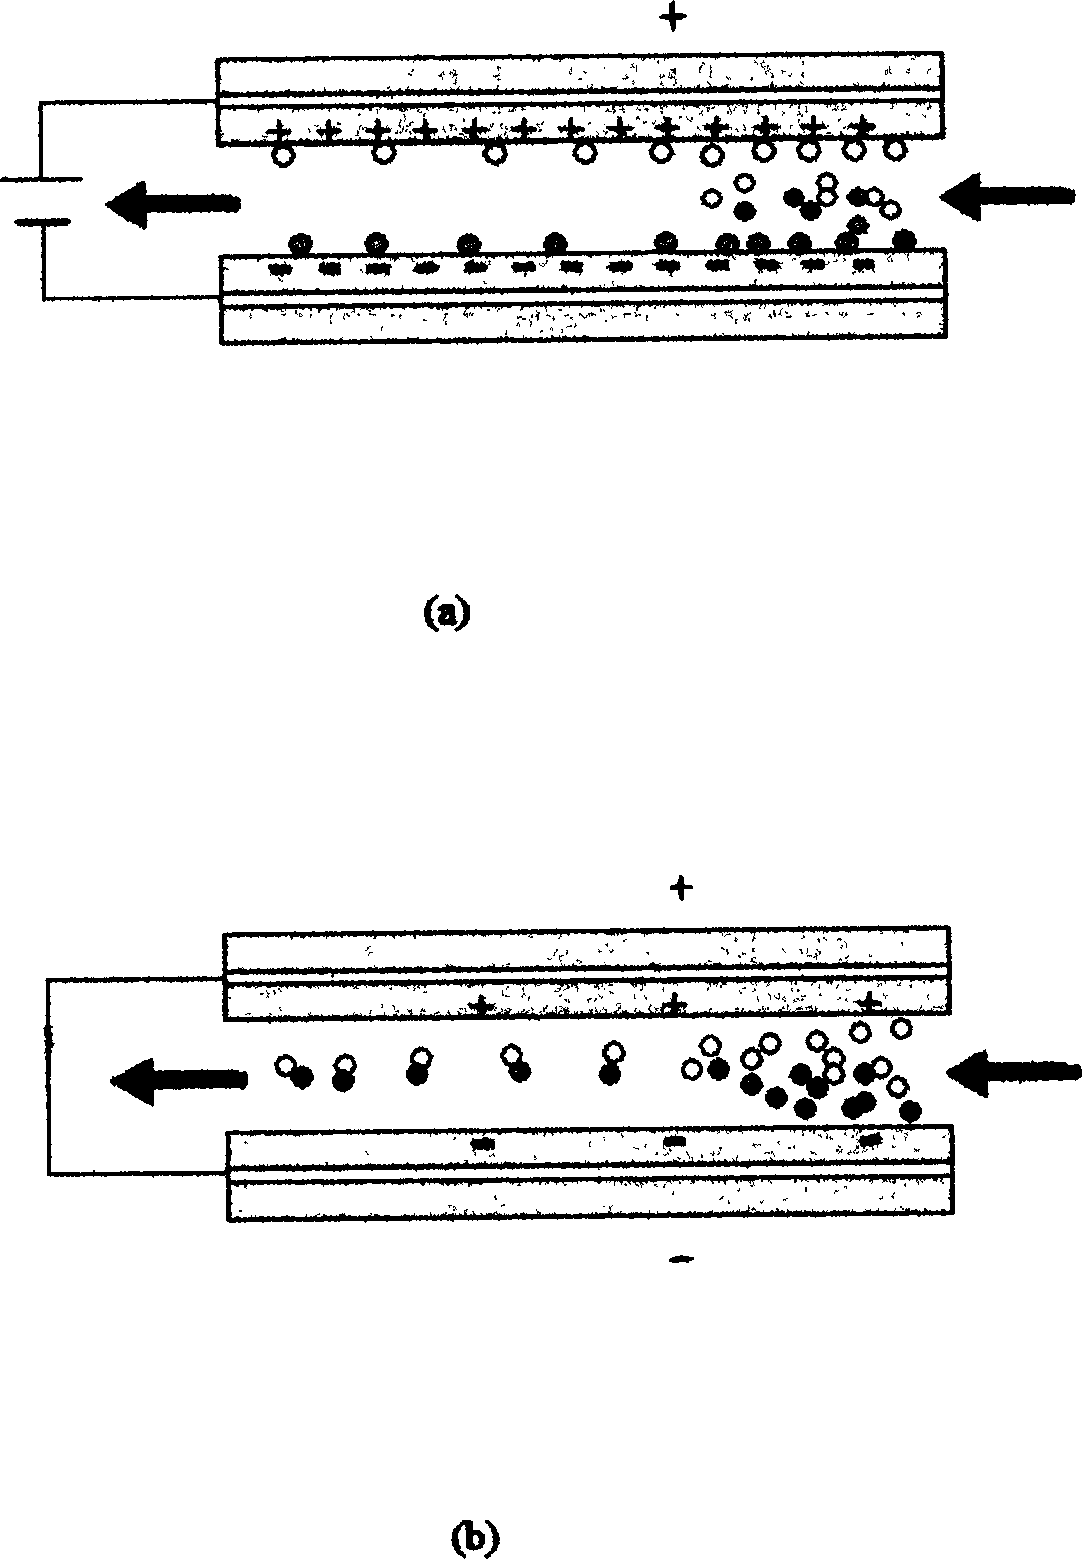 Composite nano carbon-base film electrode and use therefor